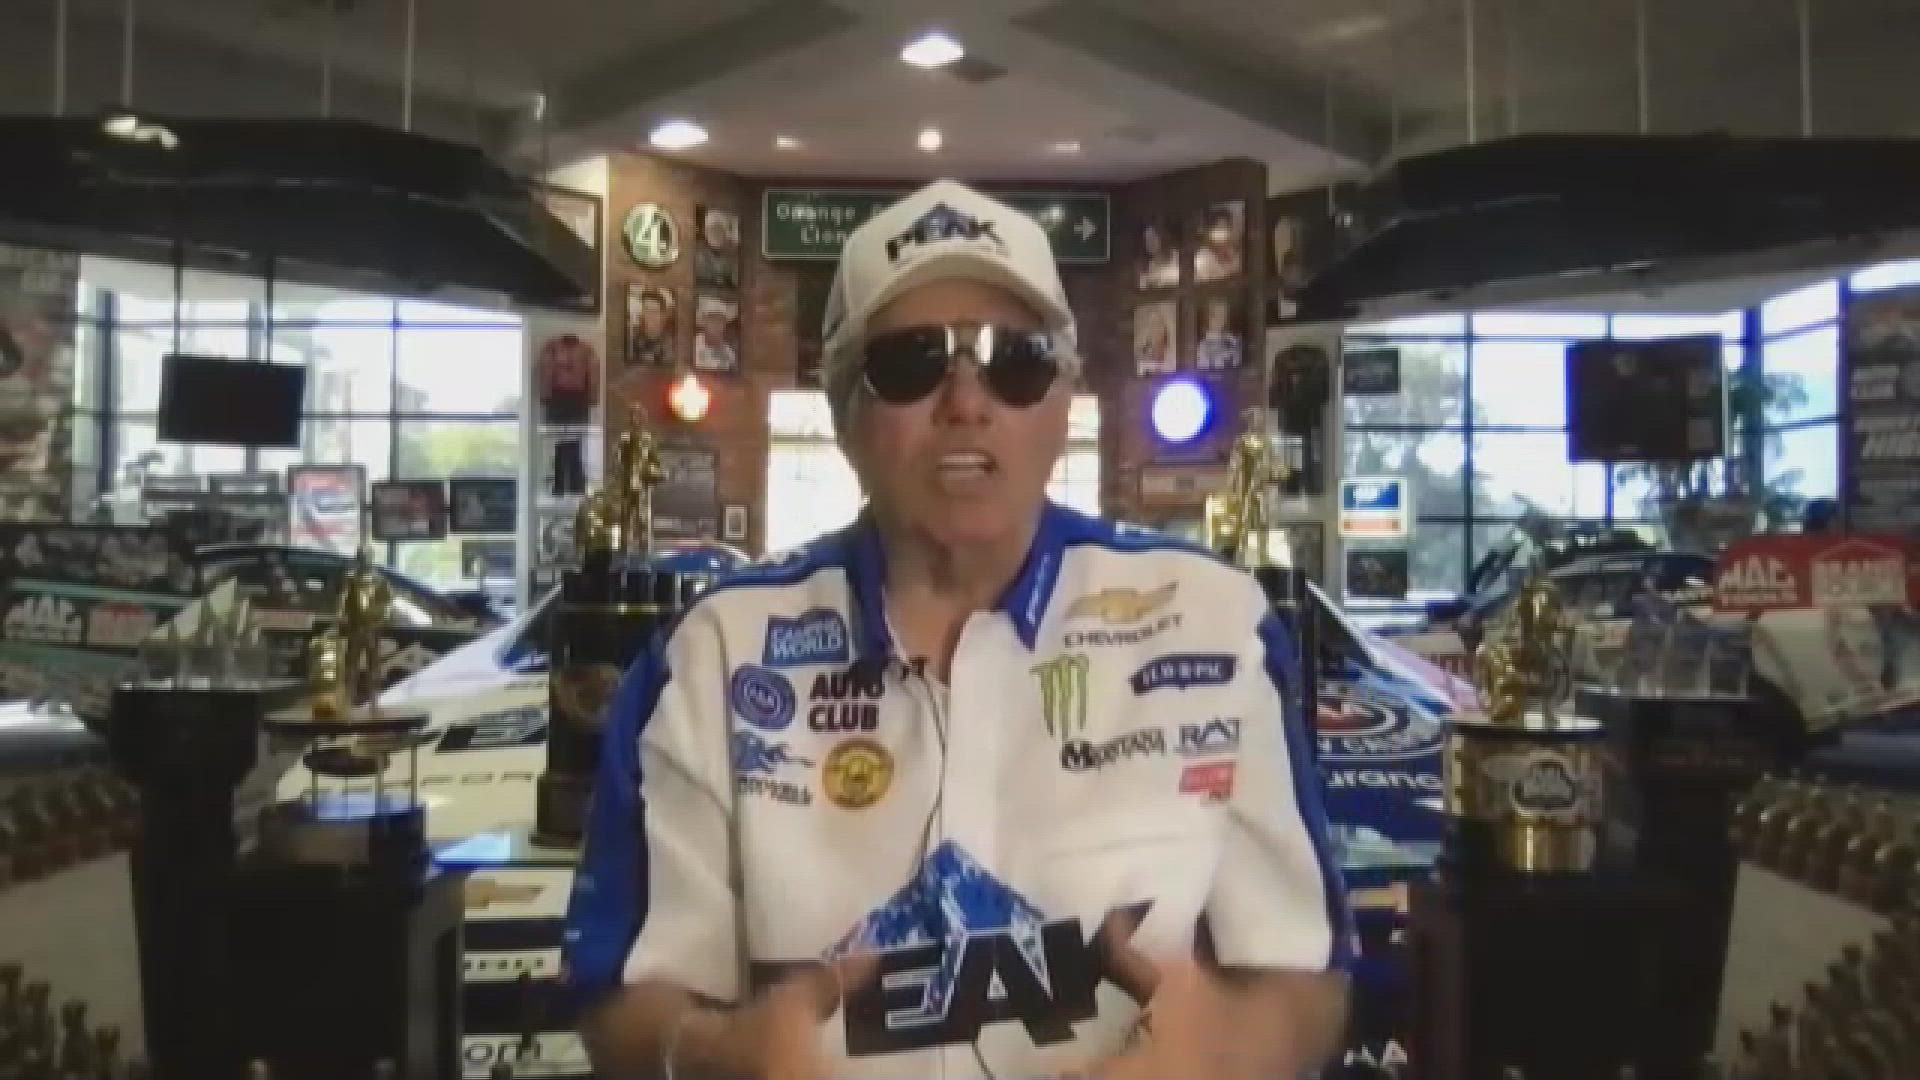 The drag racing legend will be driving in the Virginia NHRA Nationals this weekend.